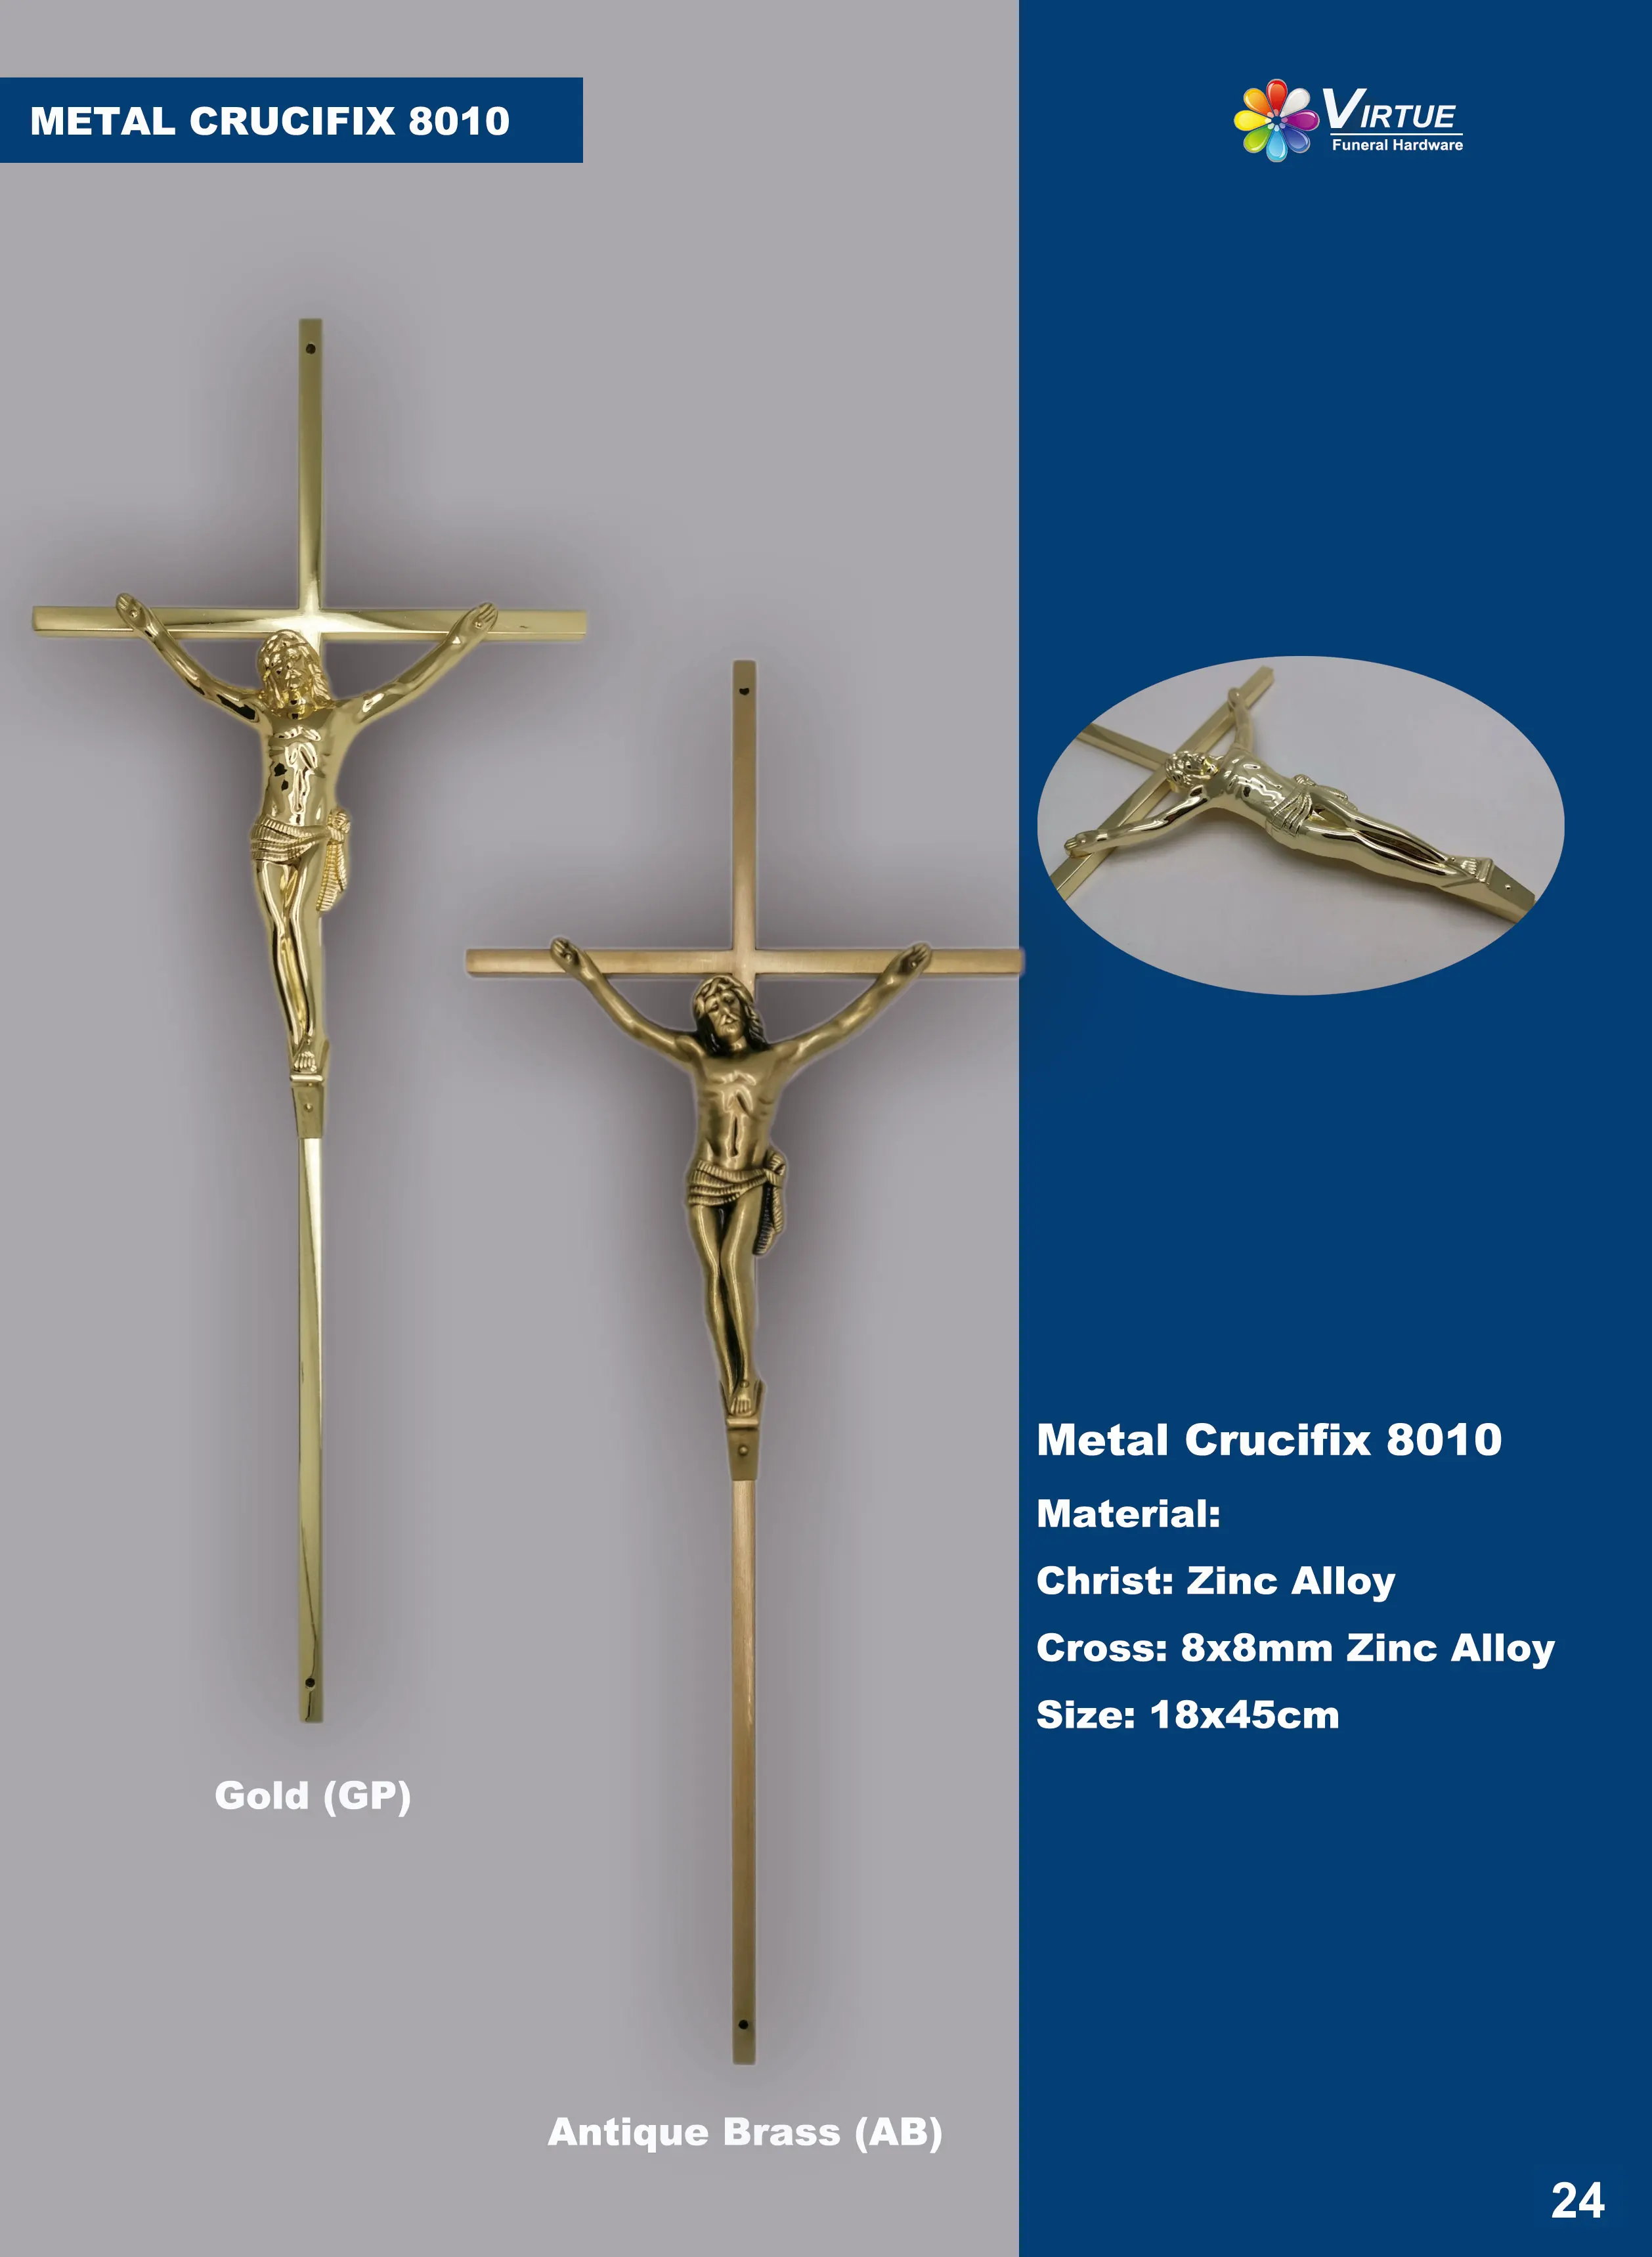 Funeral coffin crucifix and cross by casting metal Jesus and Christ 8010